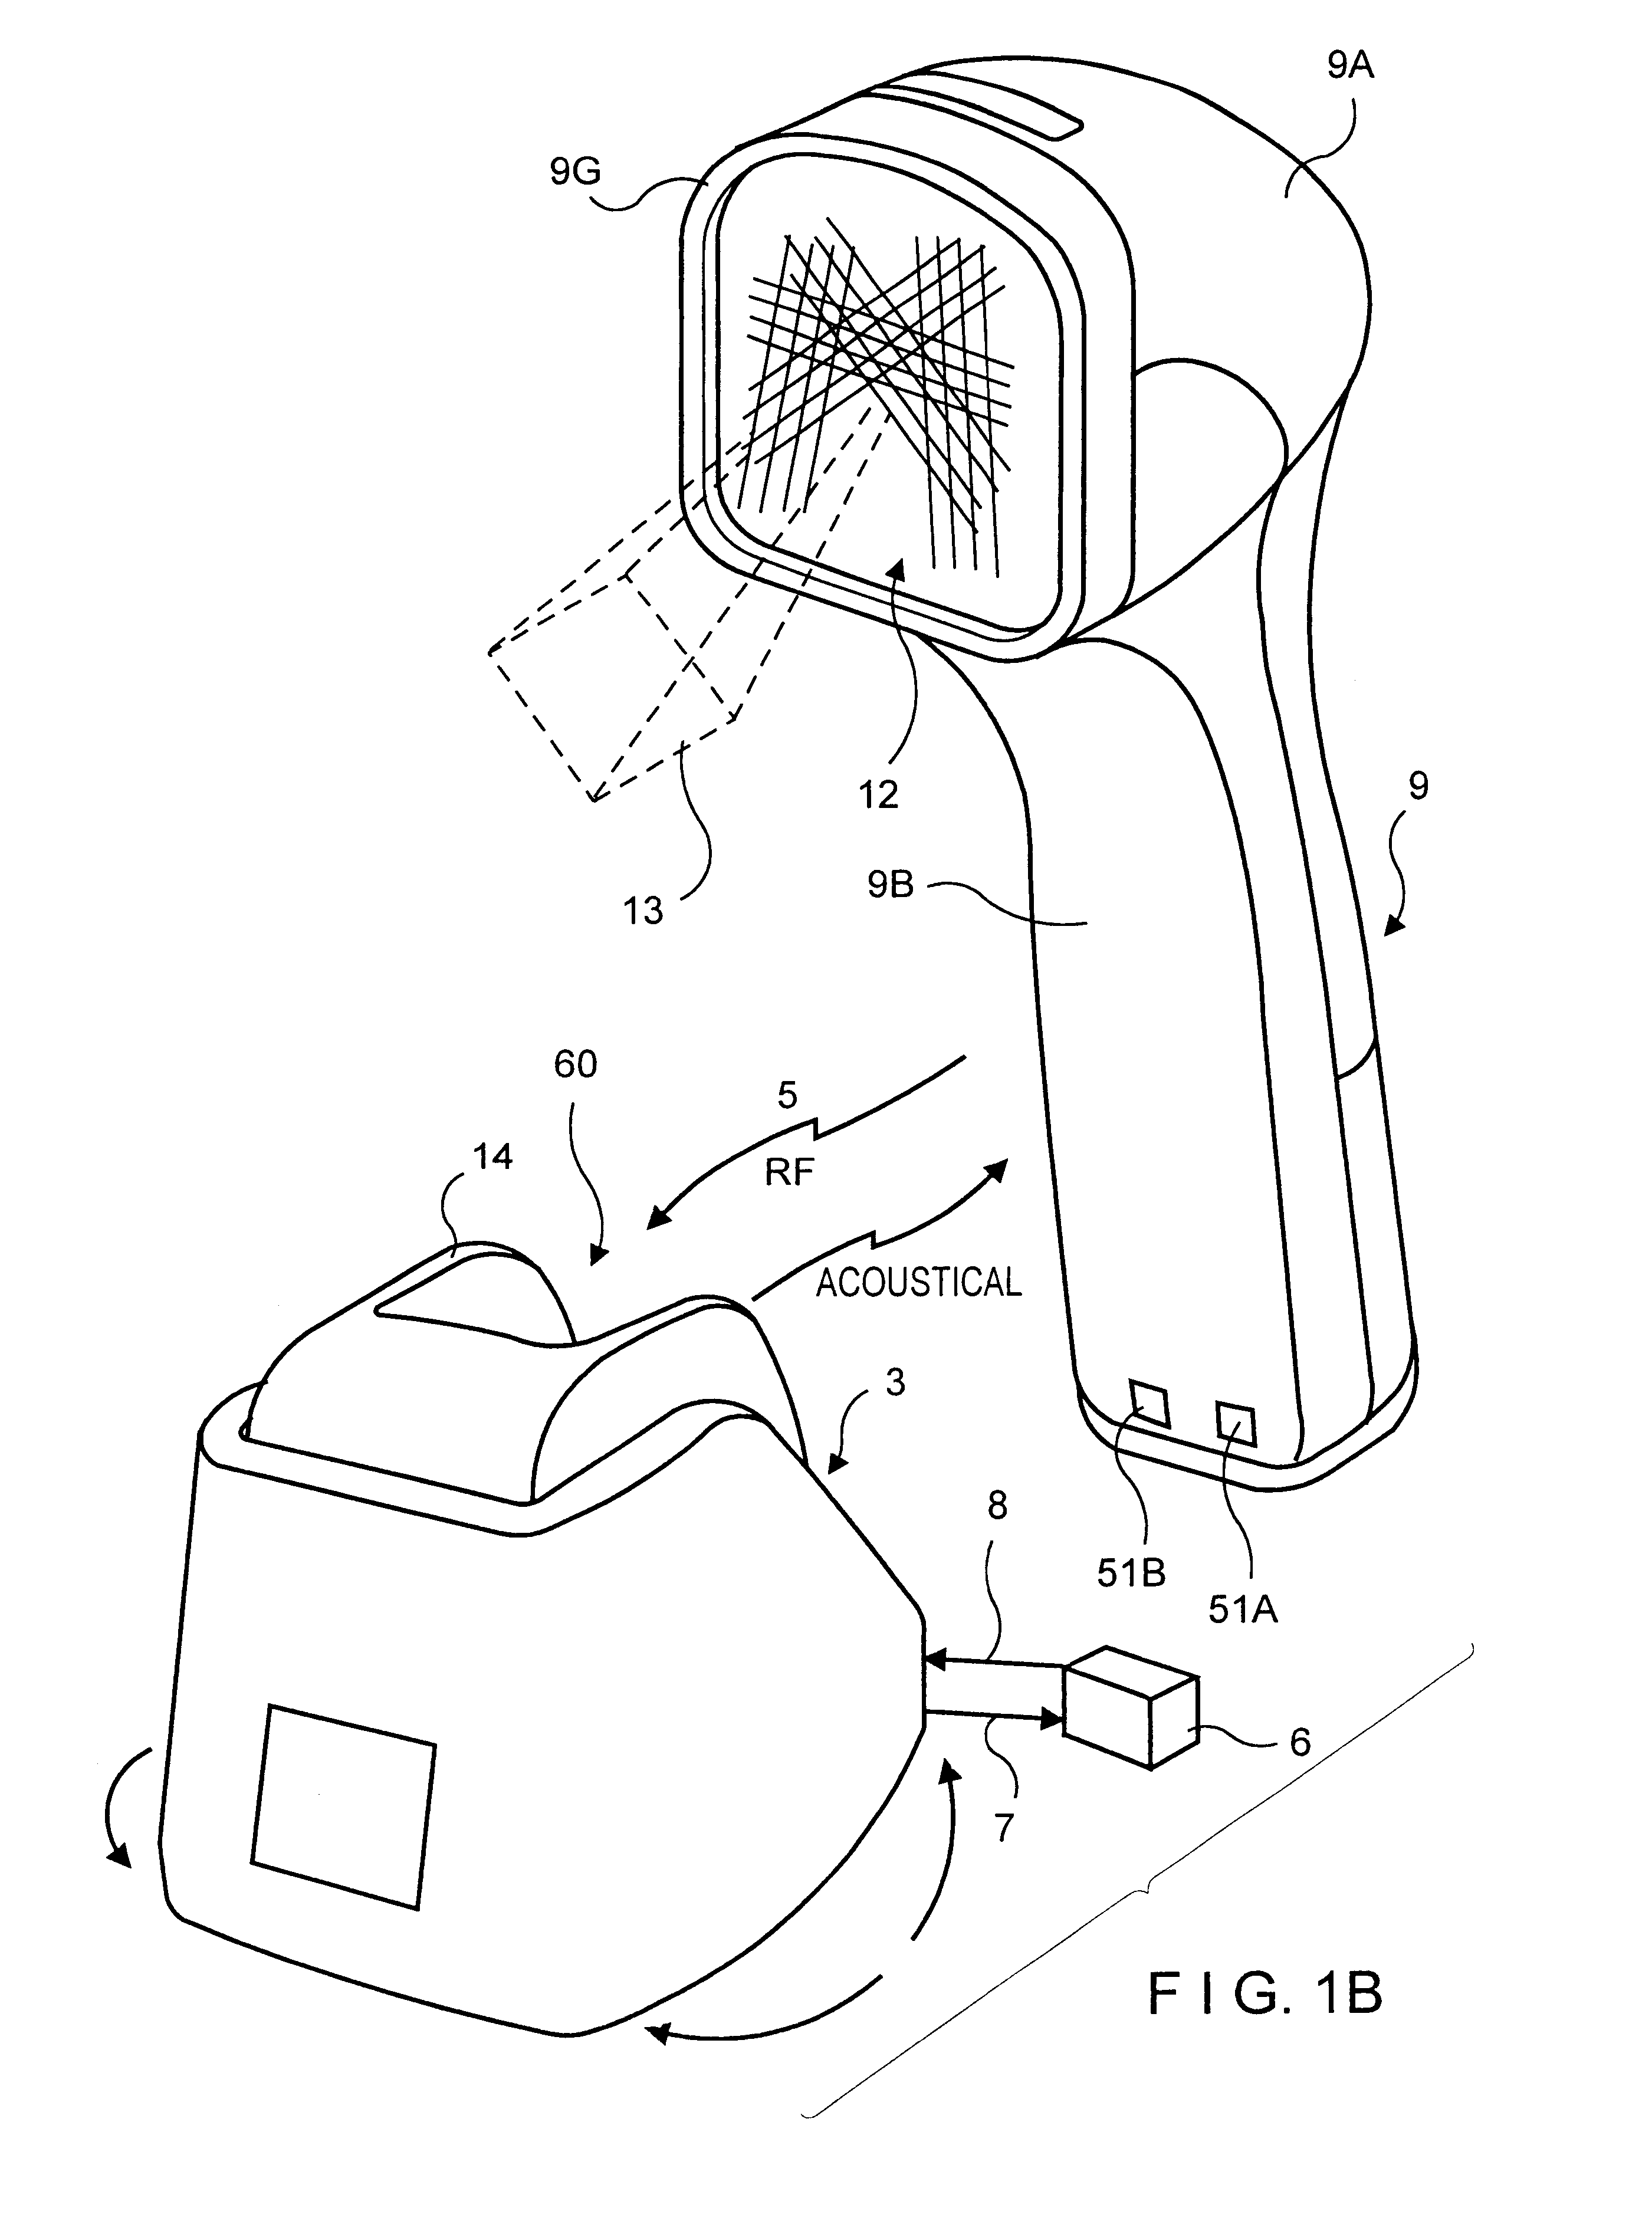 Automatic hand-supportable laser projection scanner for omni-directional reading of bar code symbols within a narrowly confined scanning volume